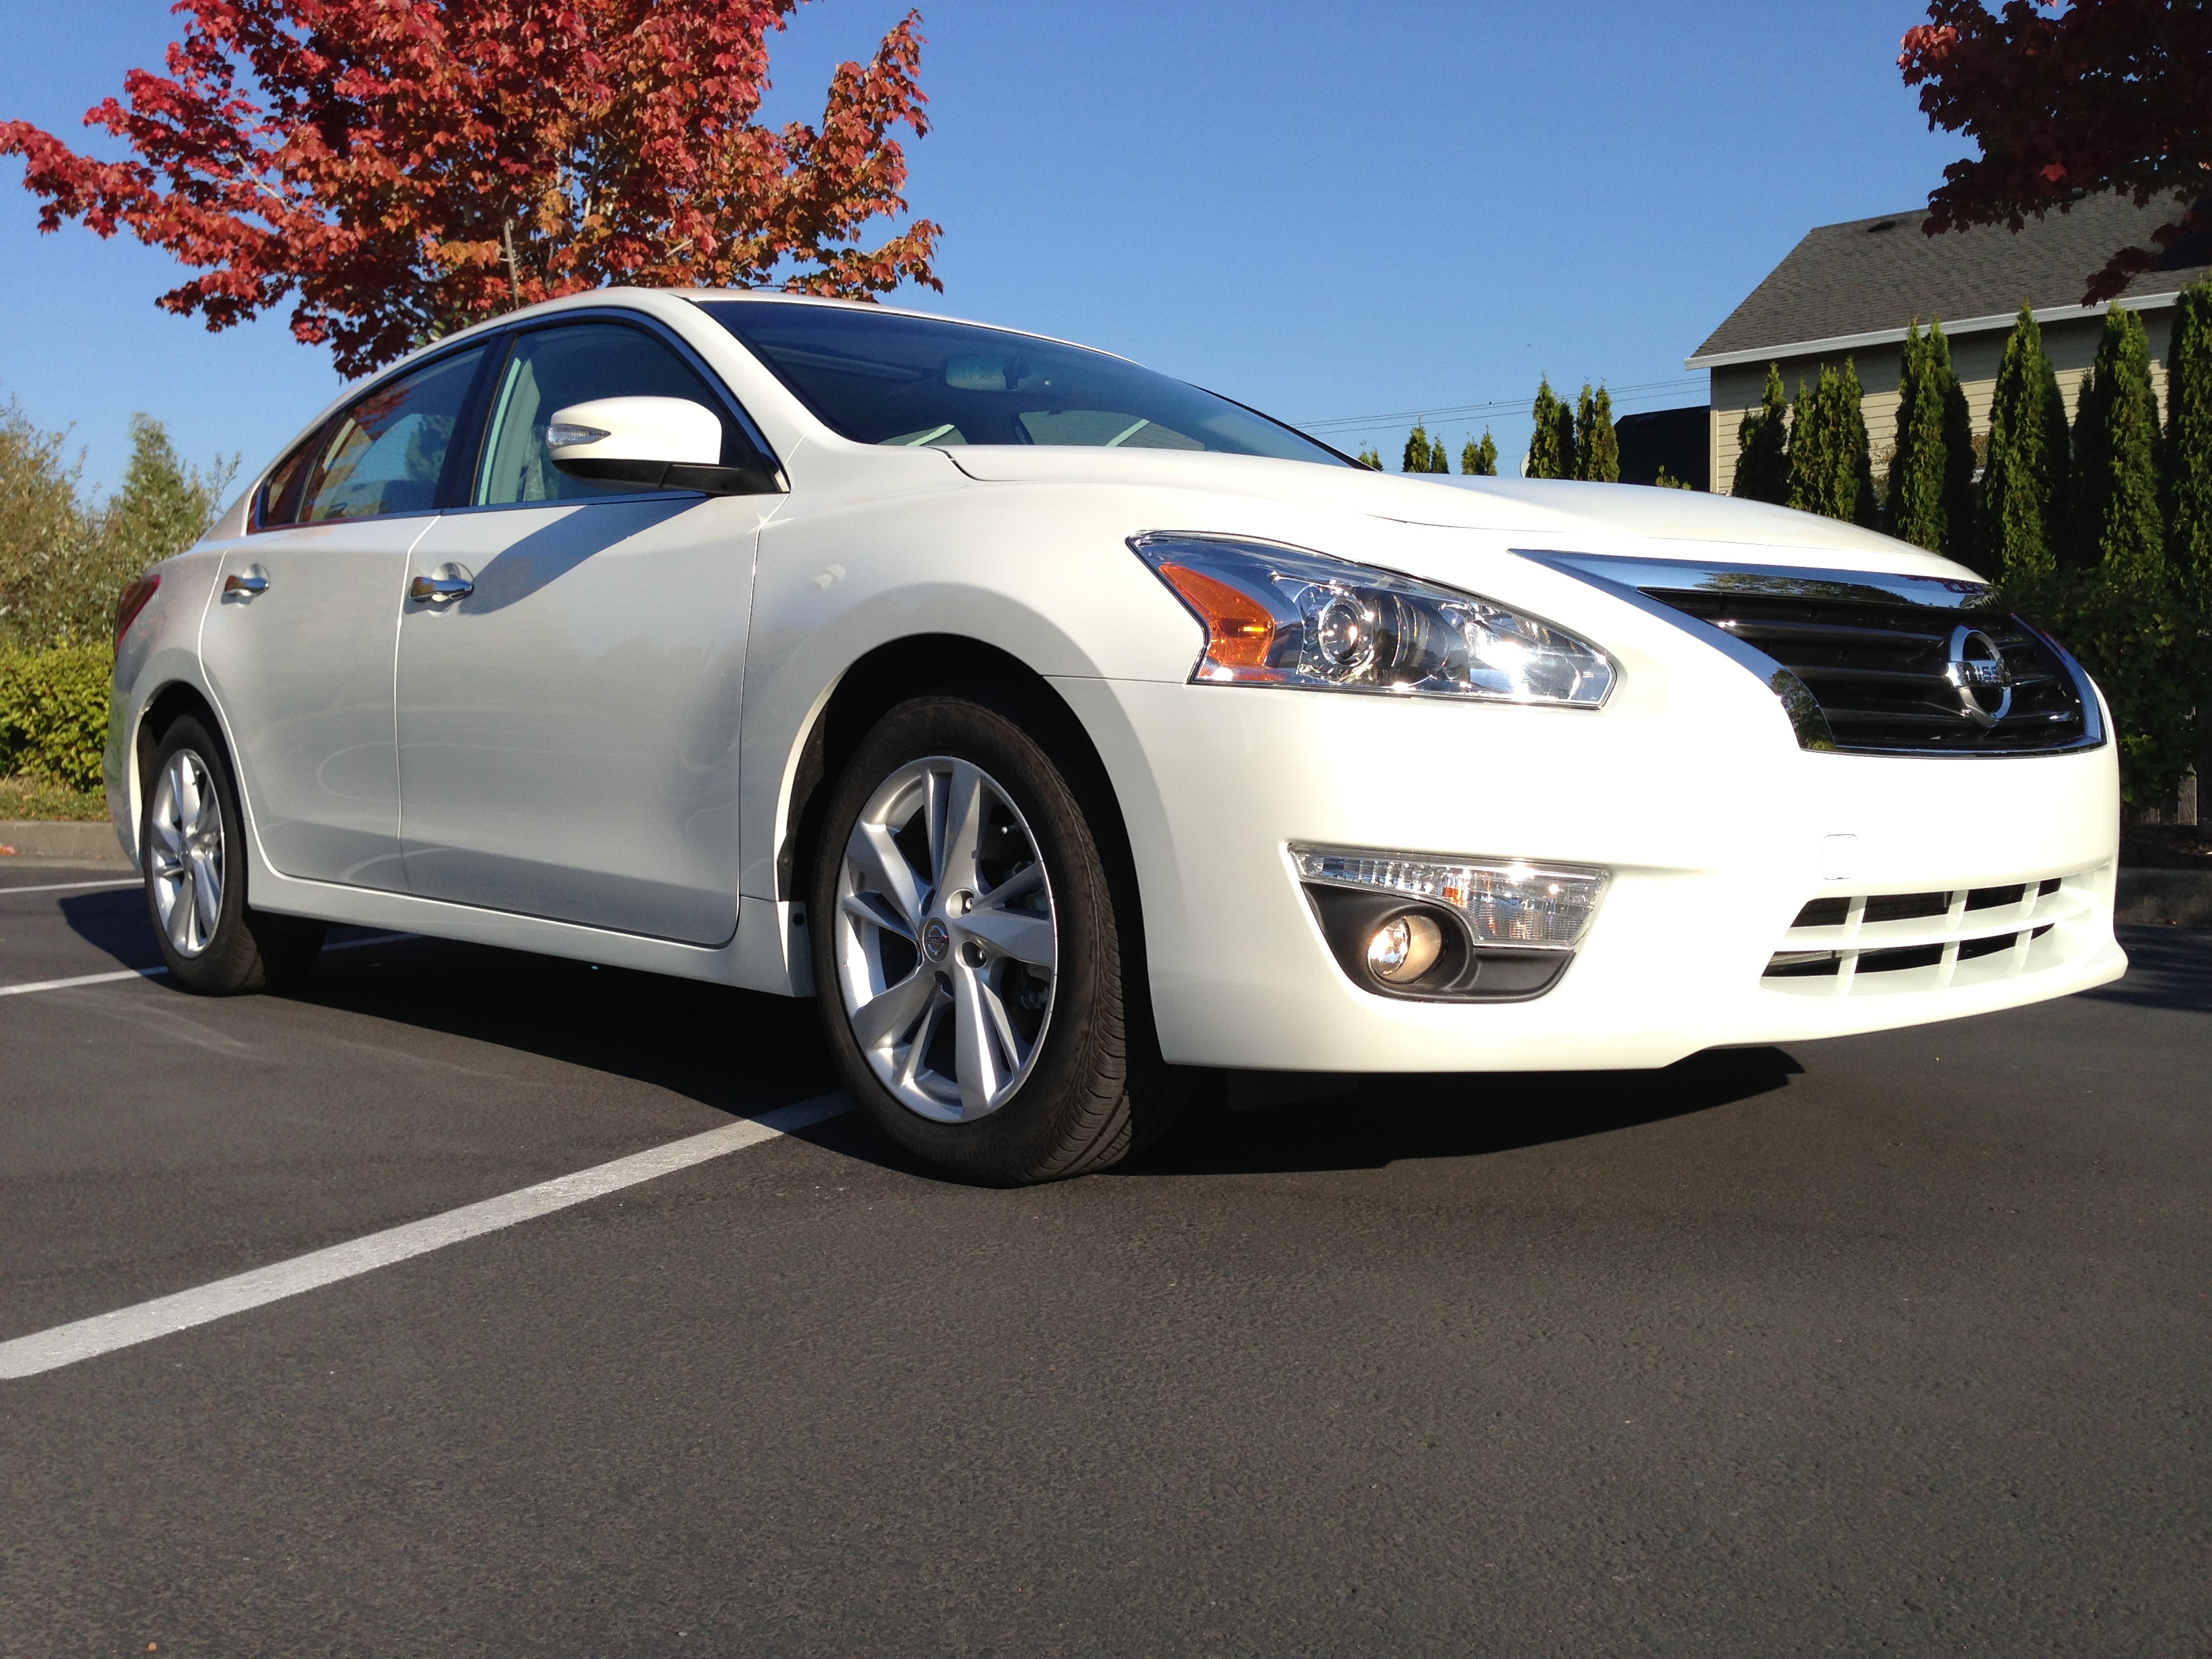 Green Car Reports 2013 Best Car To Buy Nominee: Nissan Altima